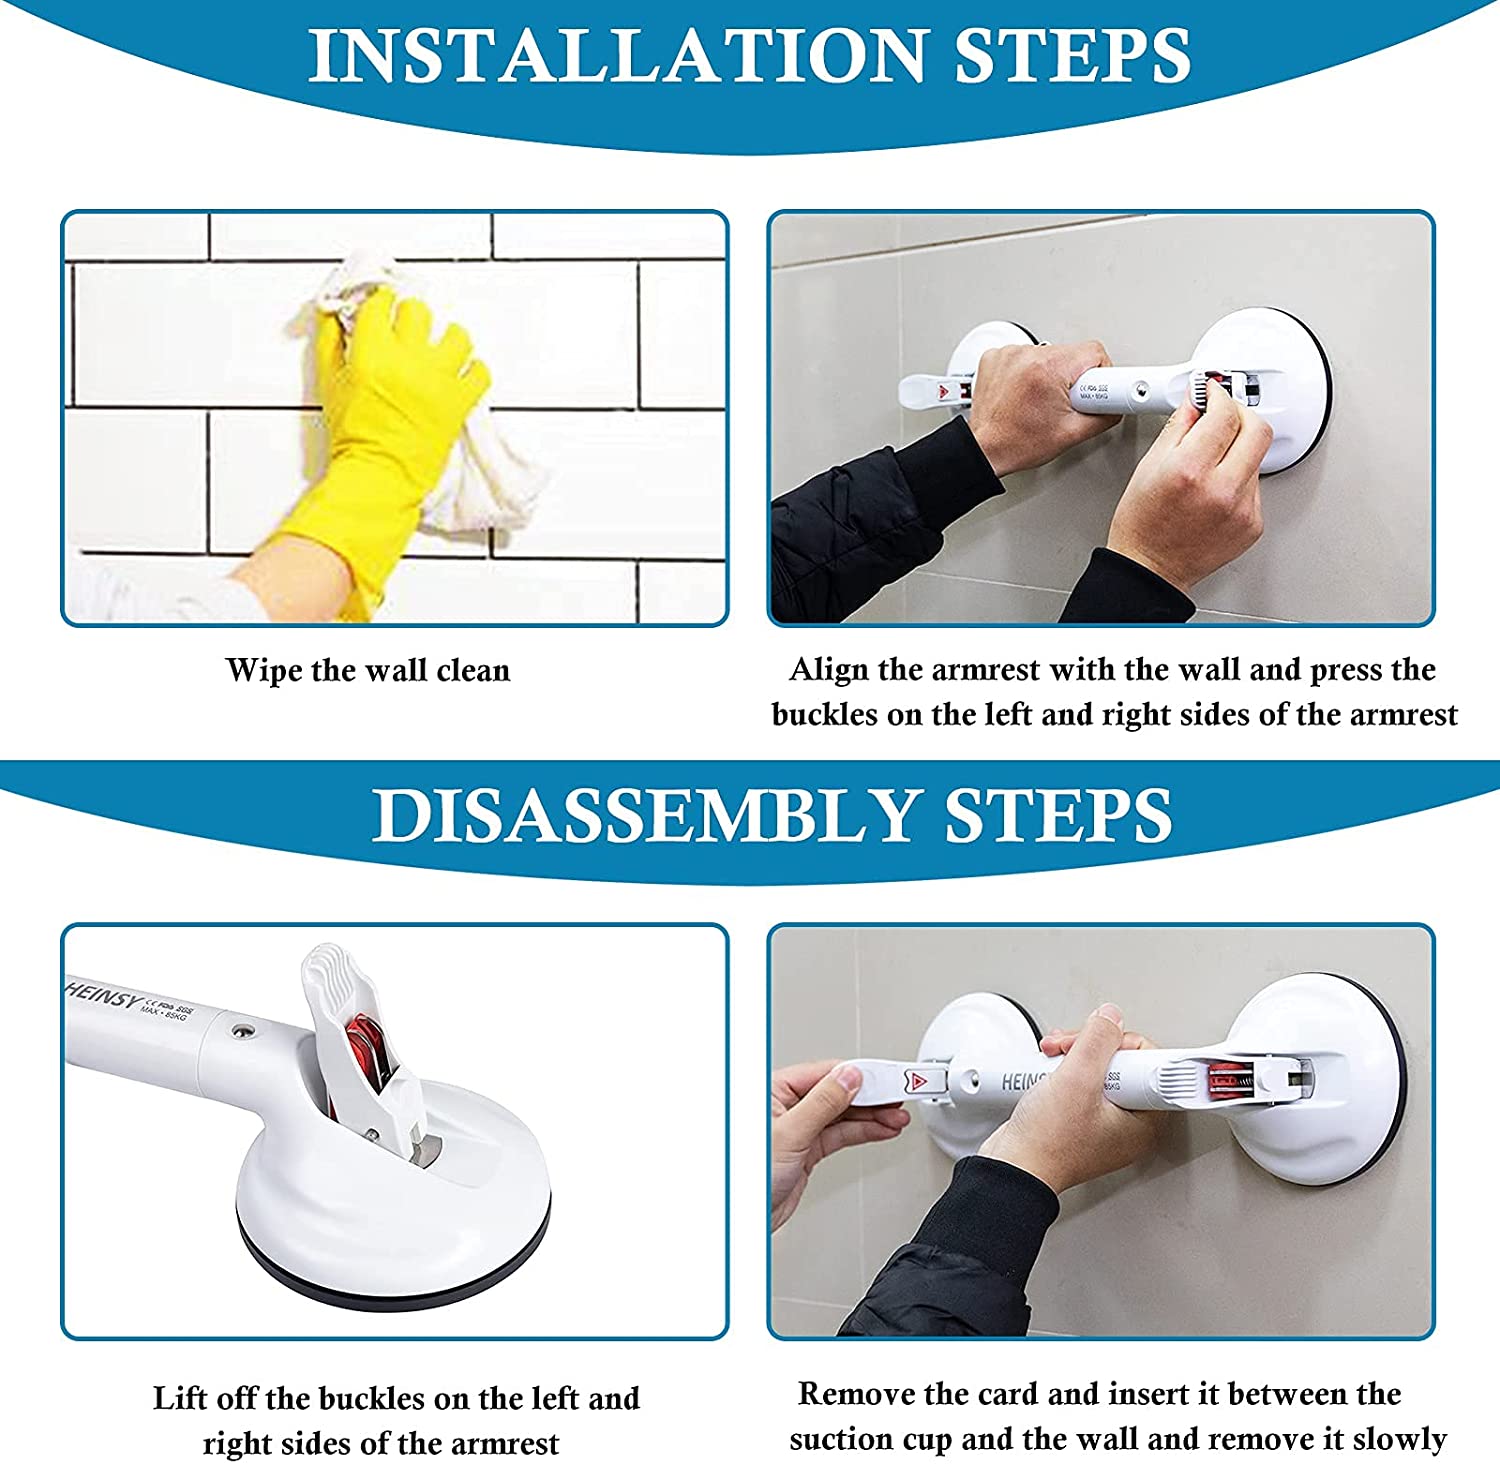 NO TOOL INSTALL ▶ Position suction cup grab bar on bathtub or shower wall, flip latches up. Apply pressure to HANDLE, press each latch down to lock suction grips in place. Ability to easily relocate.